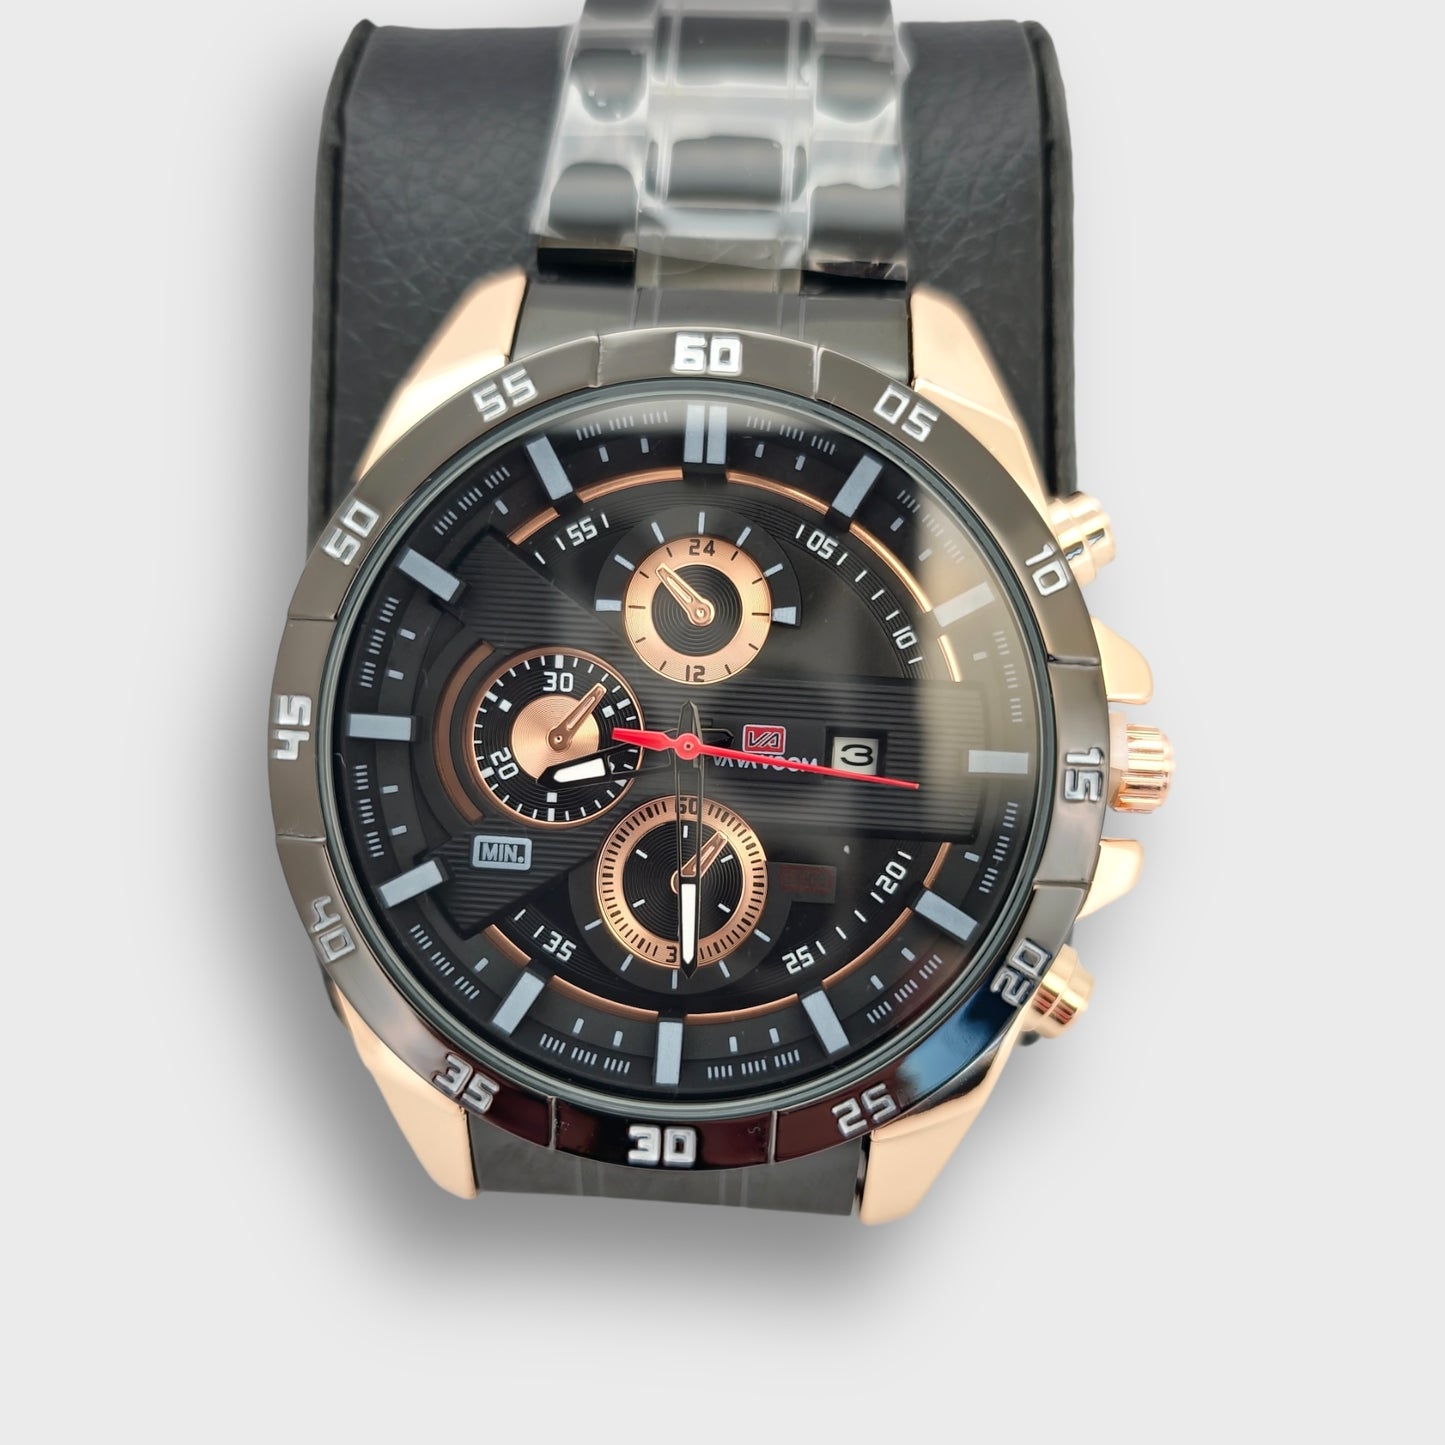 Stylish Racing Car Watch from Boujee Ice in varying colors with Steel or Silicone Staps.